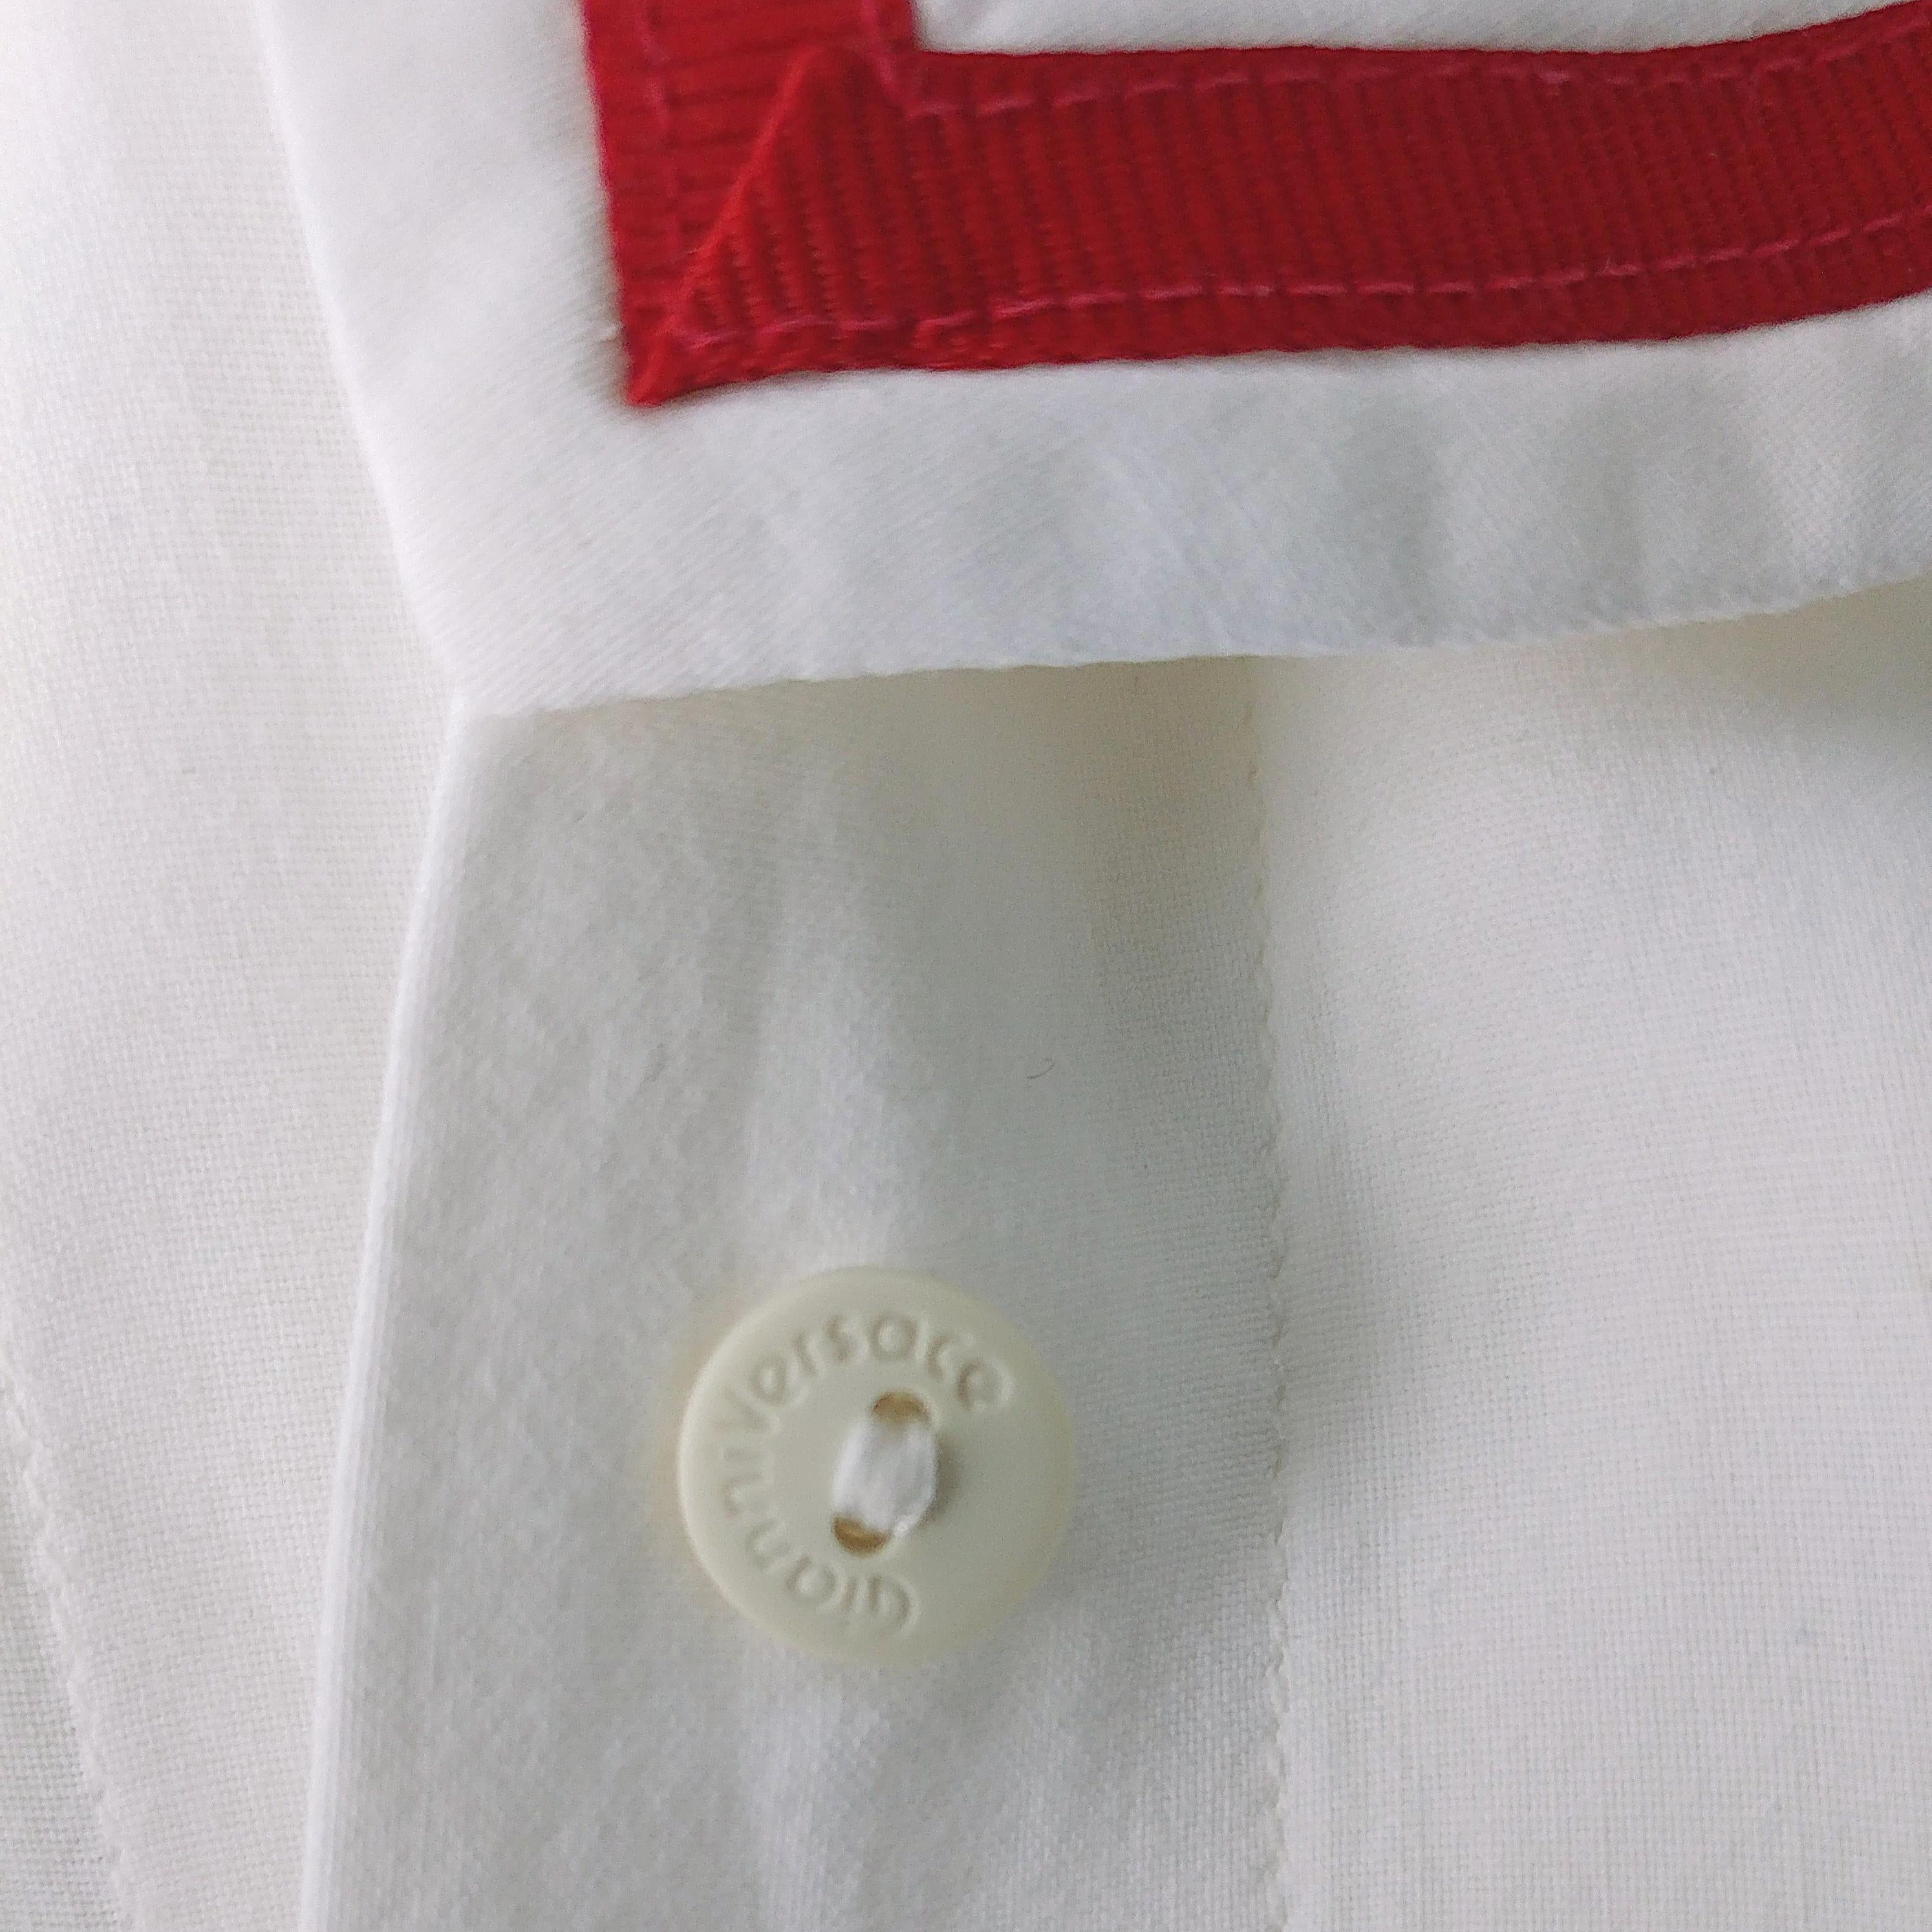 GIANNI VERSACE - Early 90s White Shirt iwith Golden Medusa Buttons  Size 2US 1